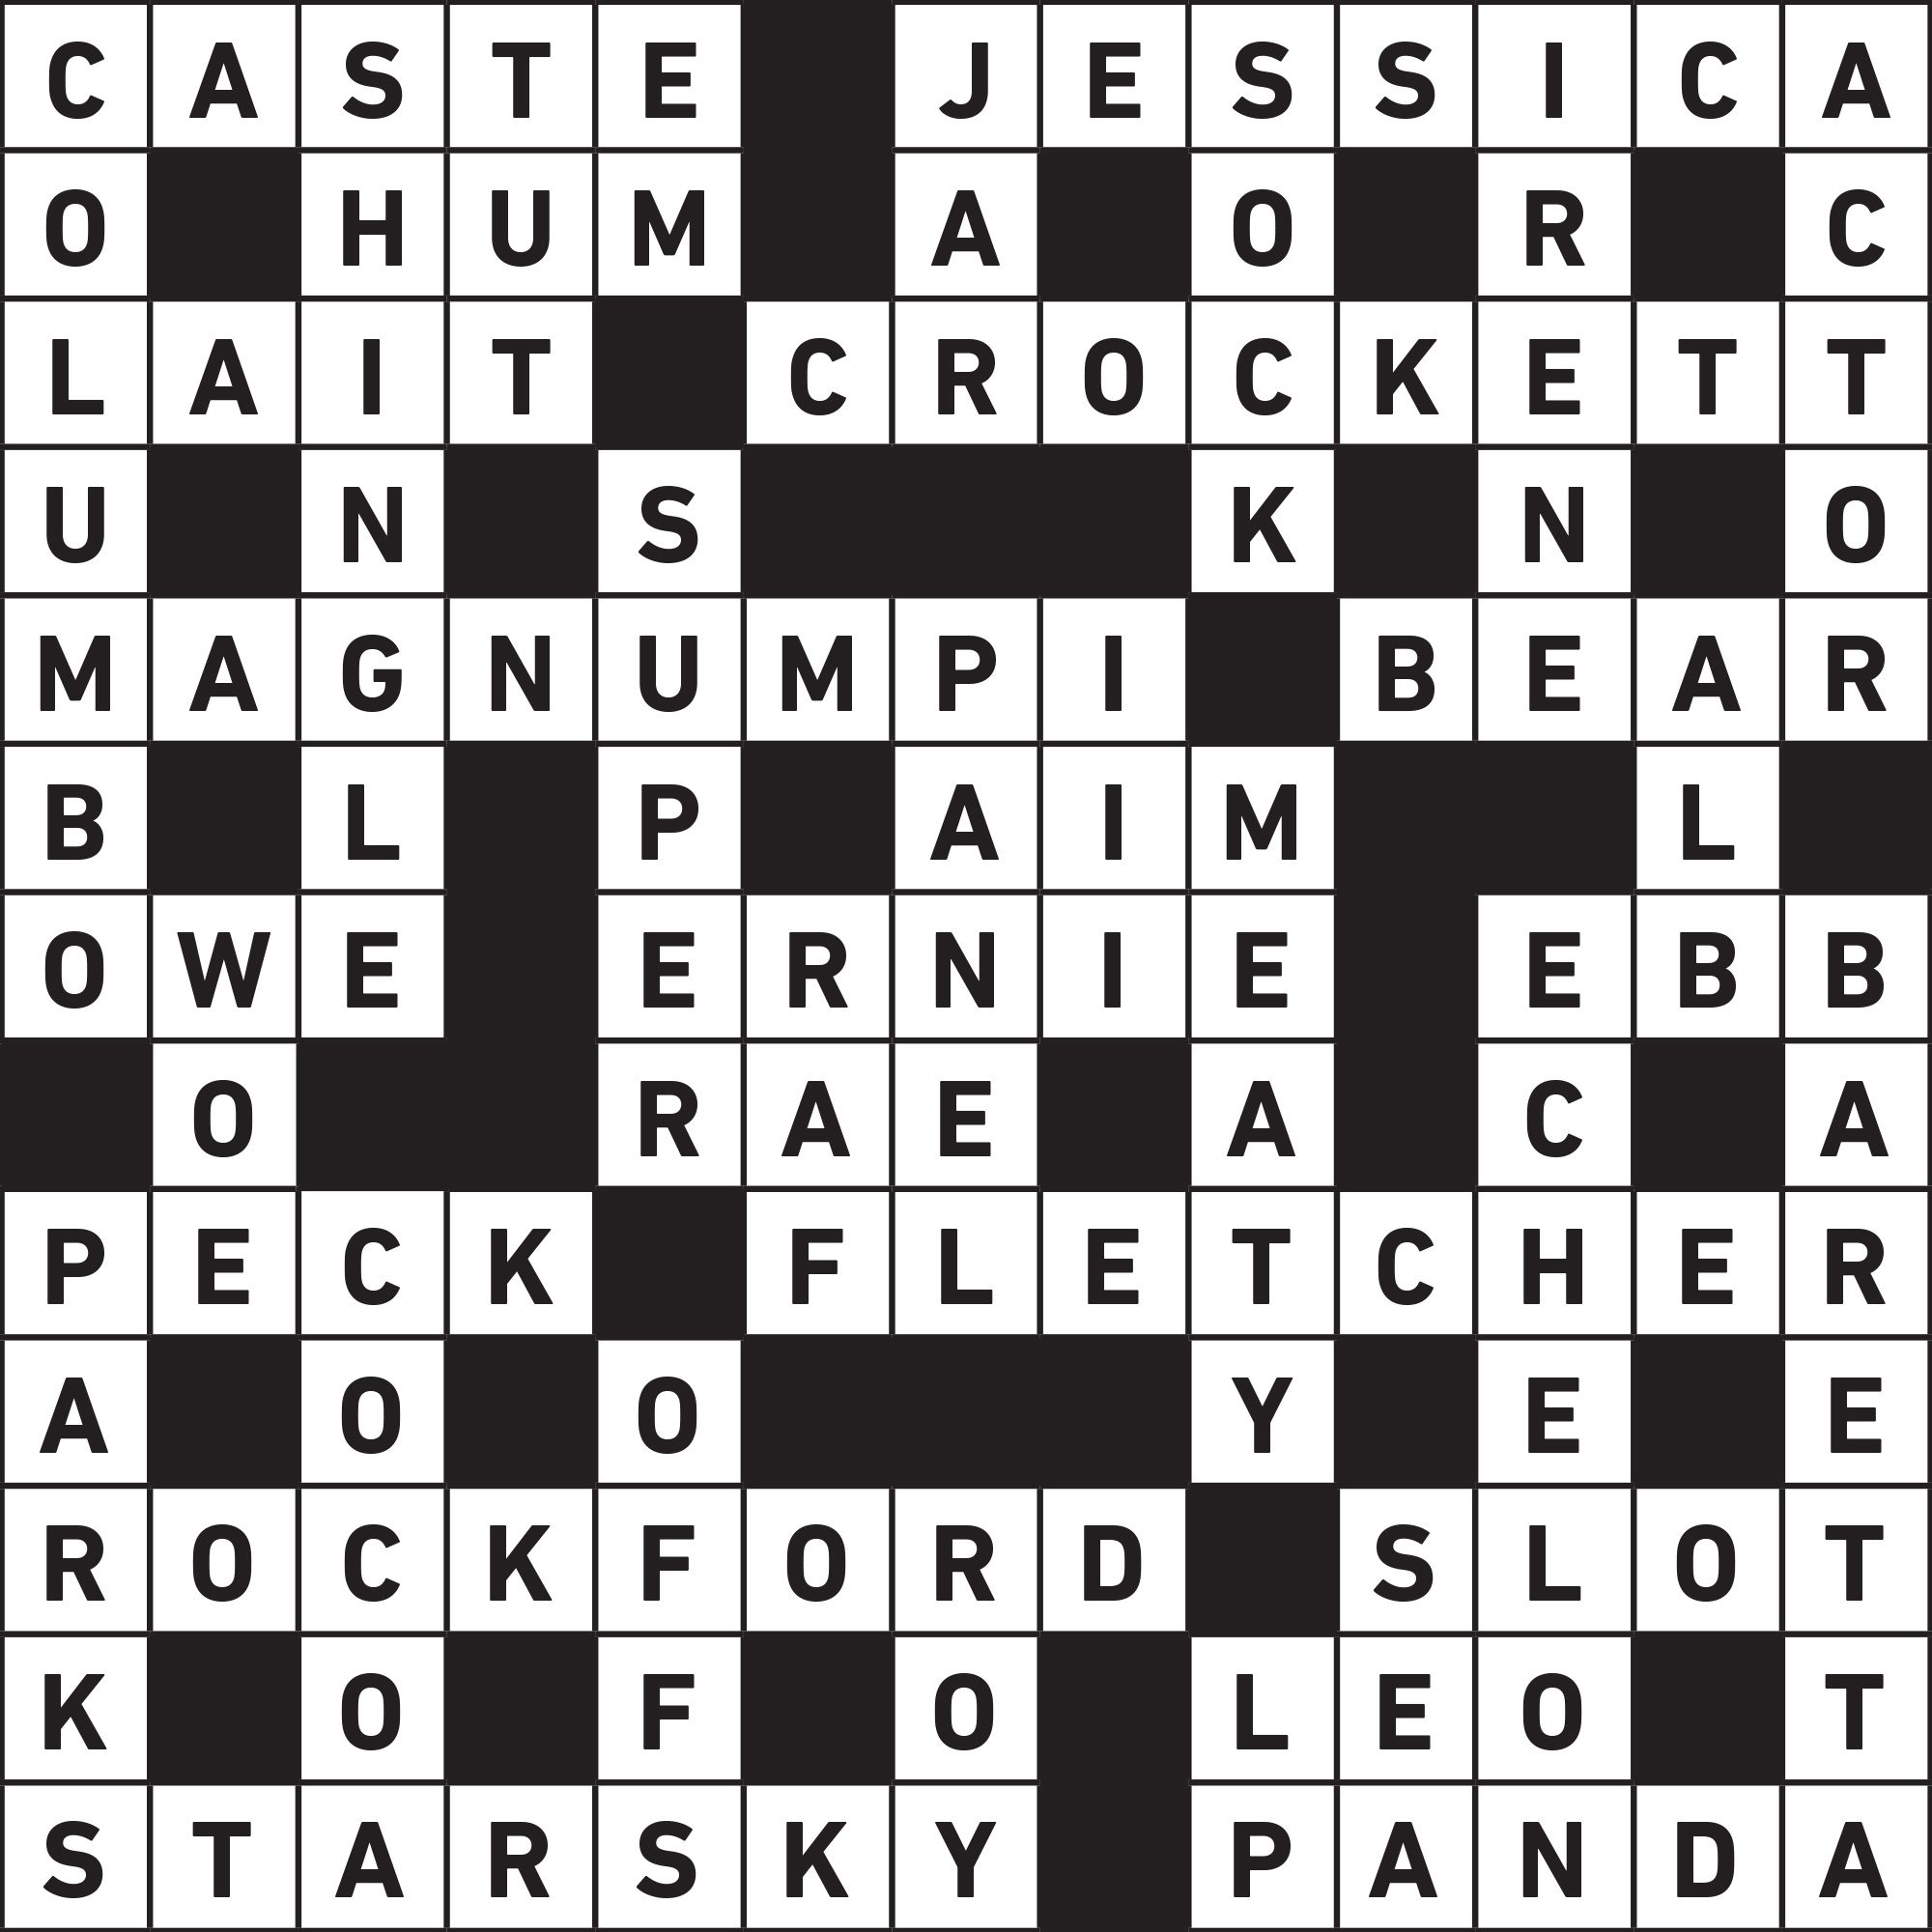 mystery themed crossword puzzle